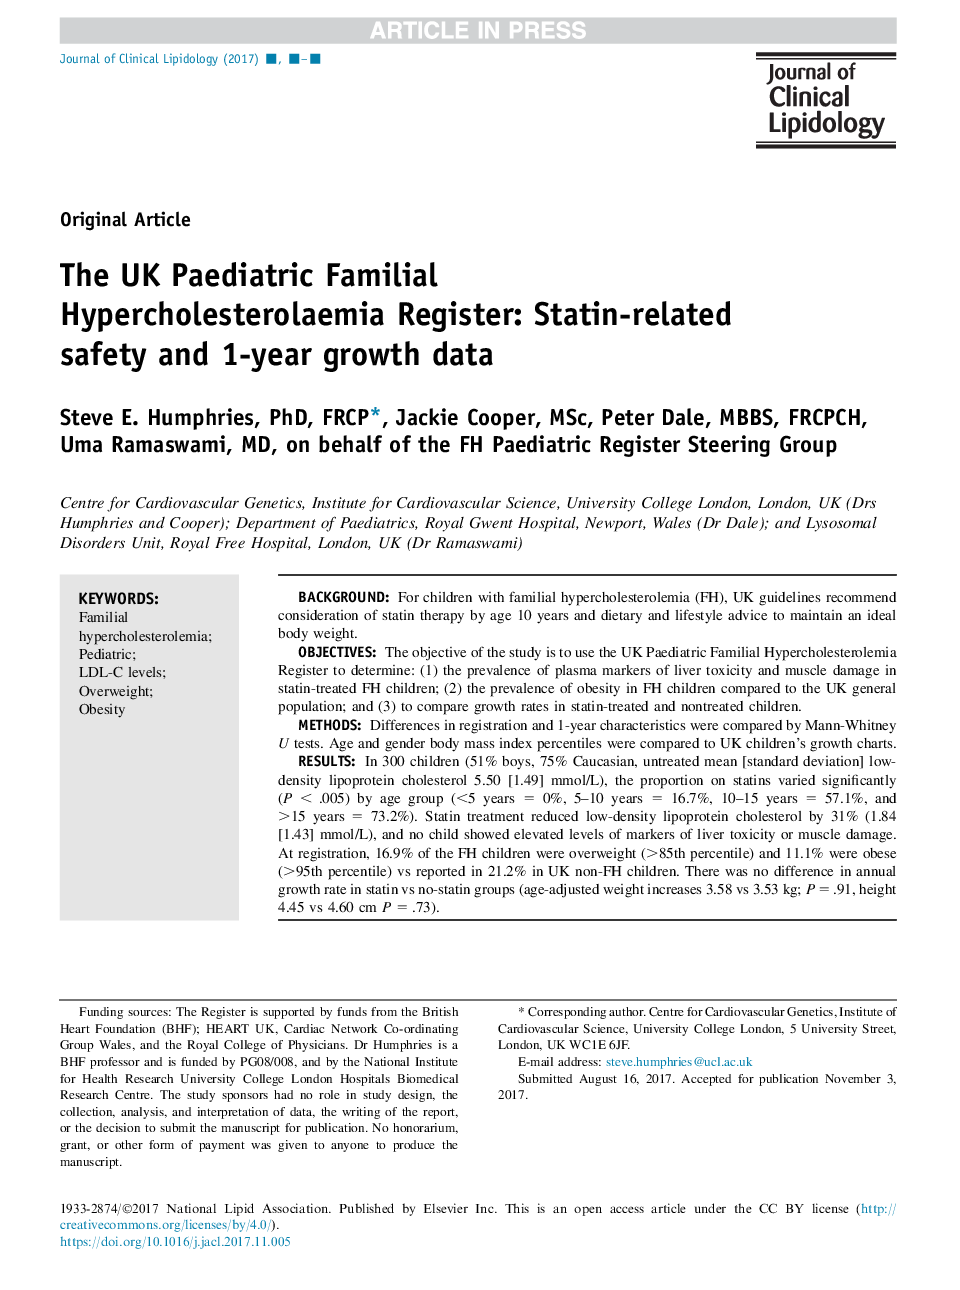 The UK Paediatric Familial Hypercholesterolaemia Register: Statin-related safety and 1-year growth data